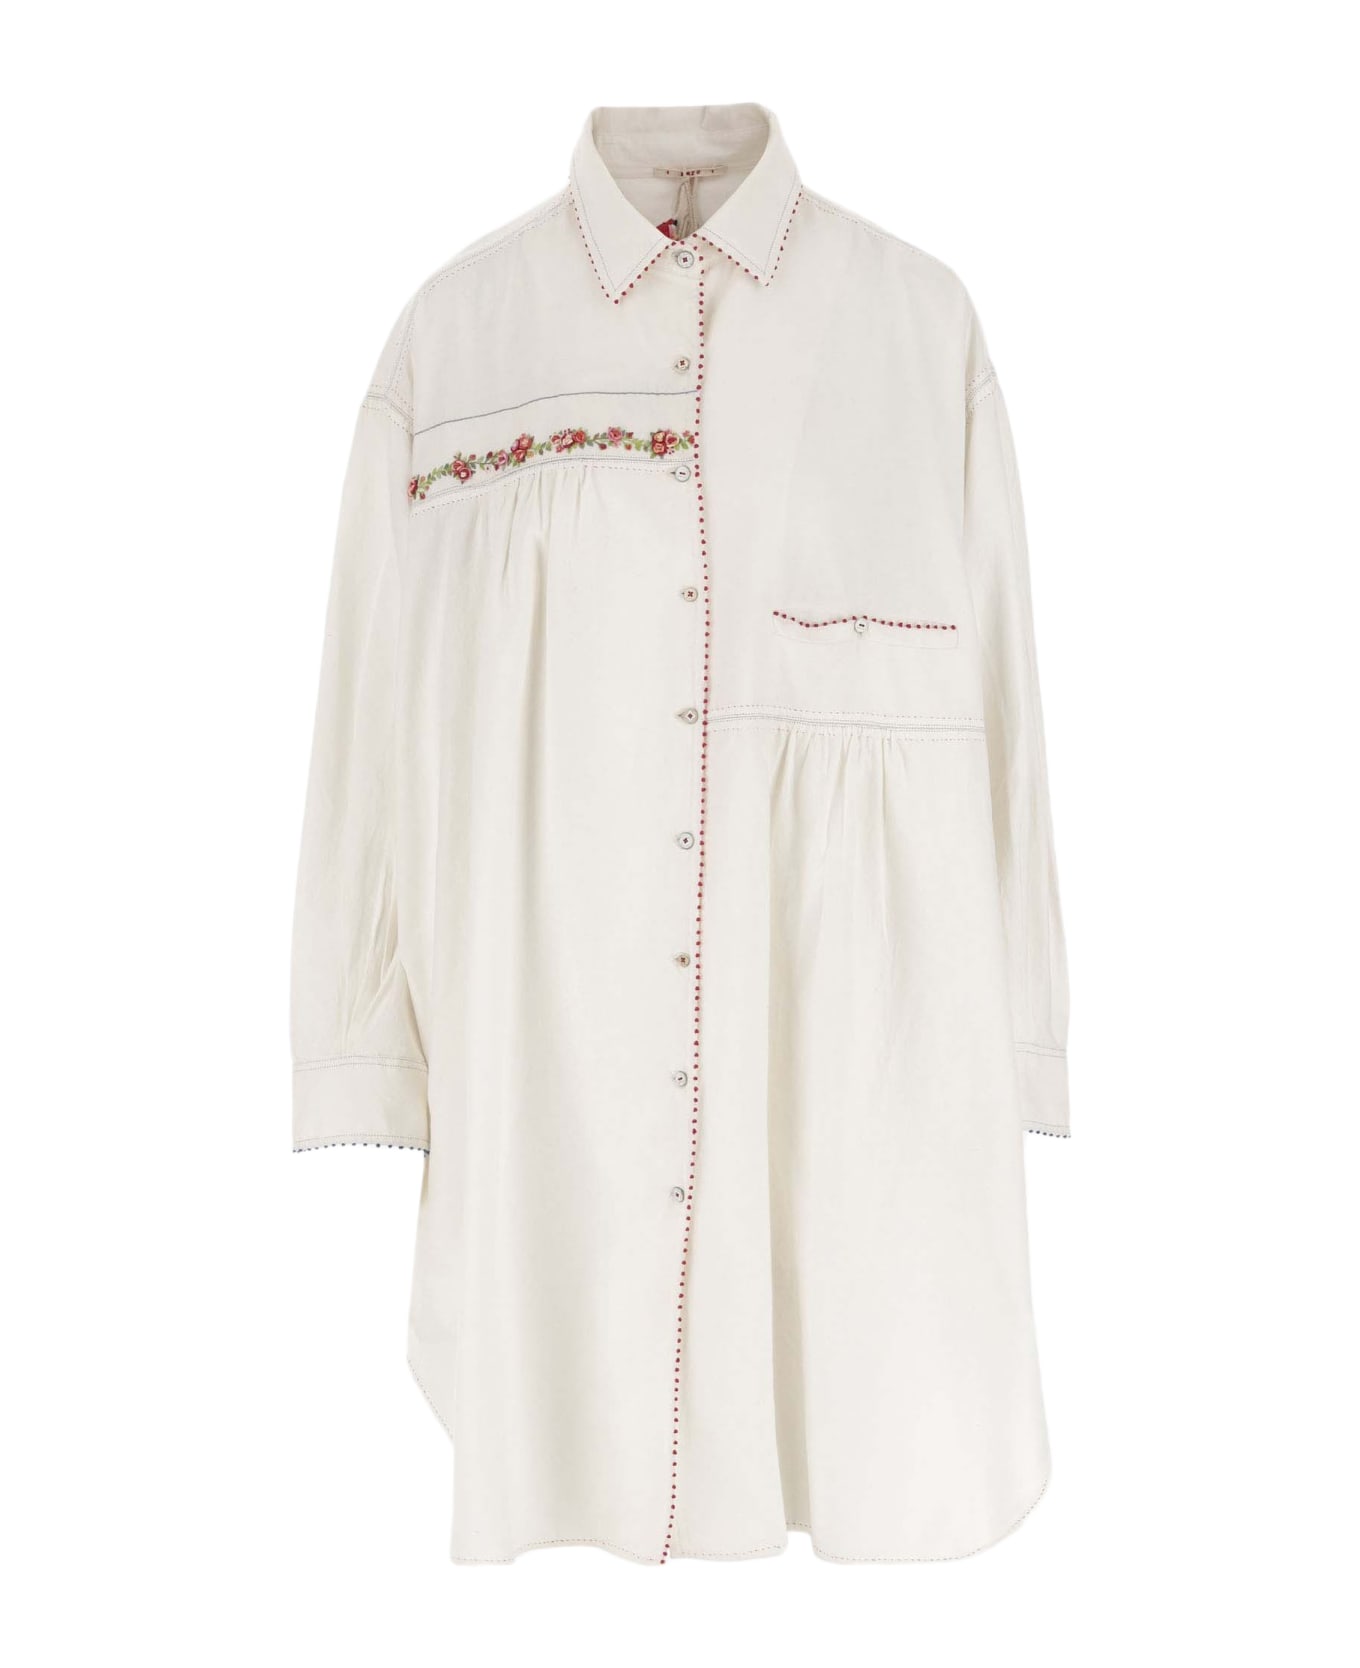 Péro Long Cotton Shirt With Floral Embroidery - White